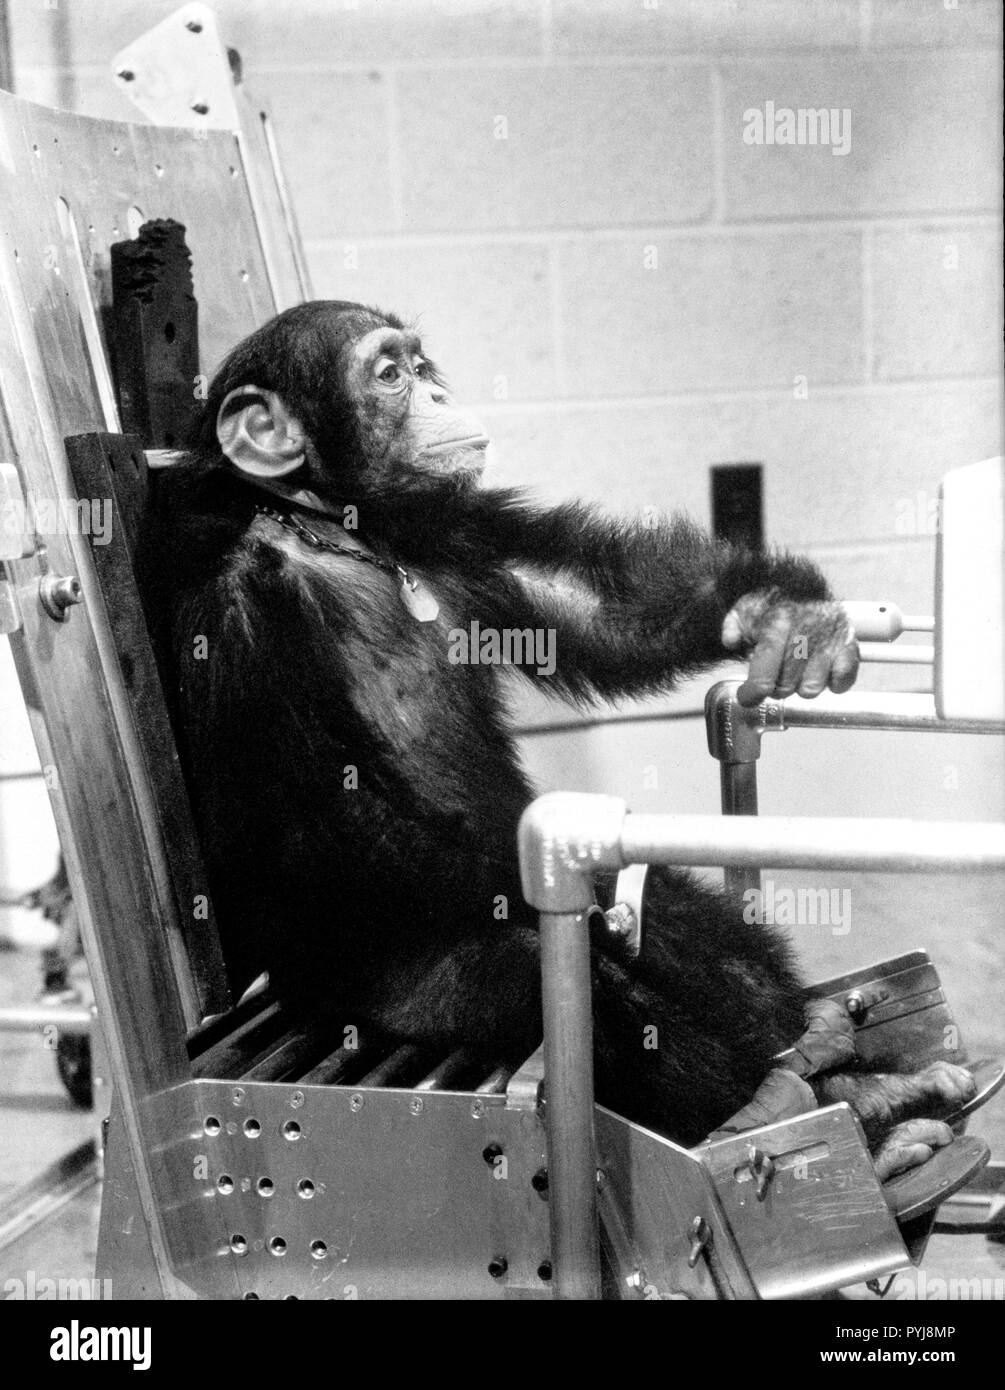 (31 Jan. 1961) --- Chimpanzee 'Ham' during preflight activity with one of his handlers prior to the Mercury-Redstone 2 (MR-2) test flight which was conducted on Jan. 31, 1961. Stock Photo